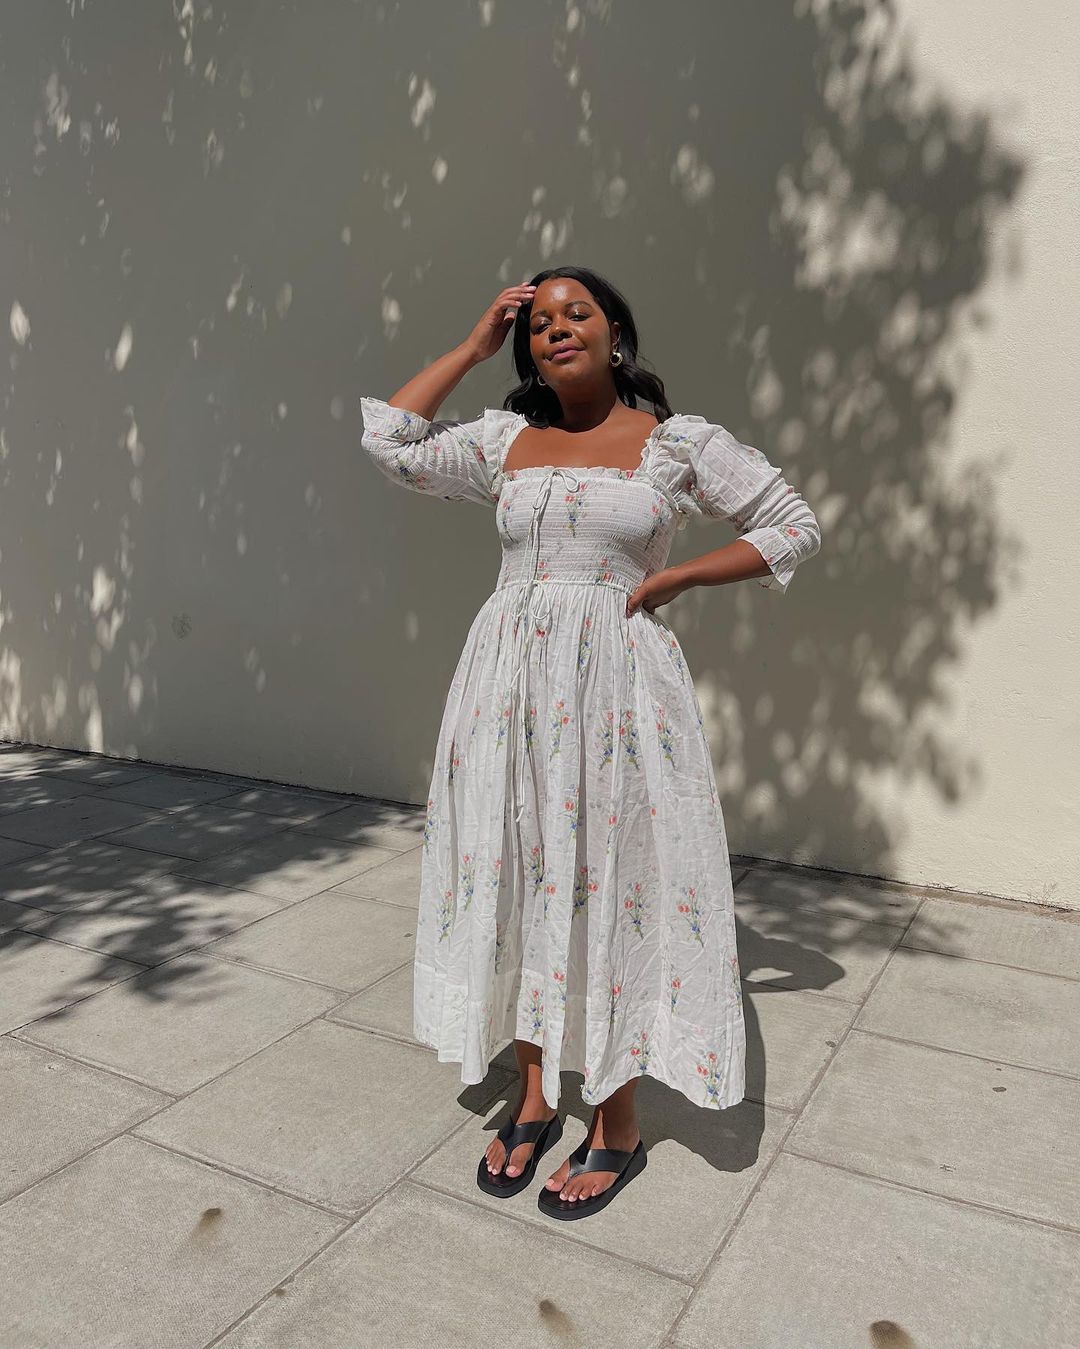 @STYLEIDEALIST wears a floral midi dress and sandals